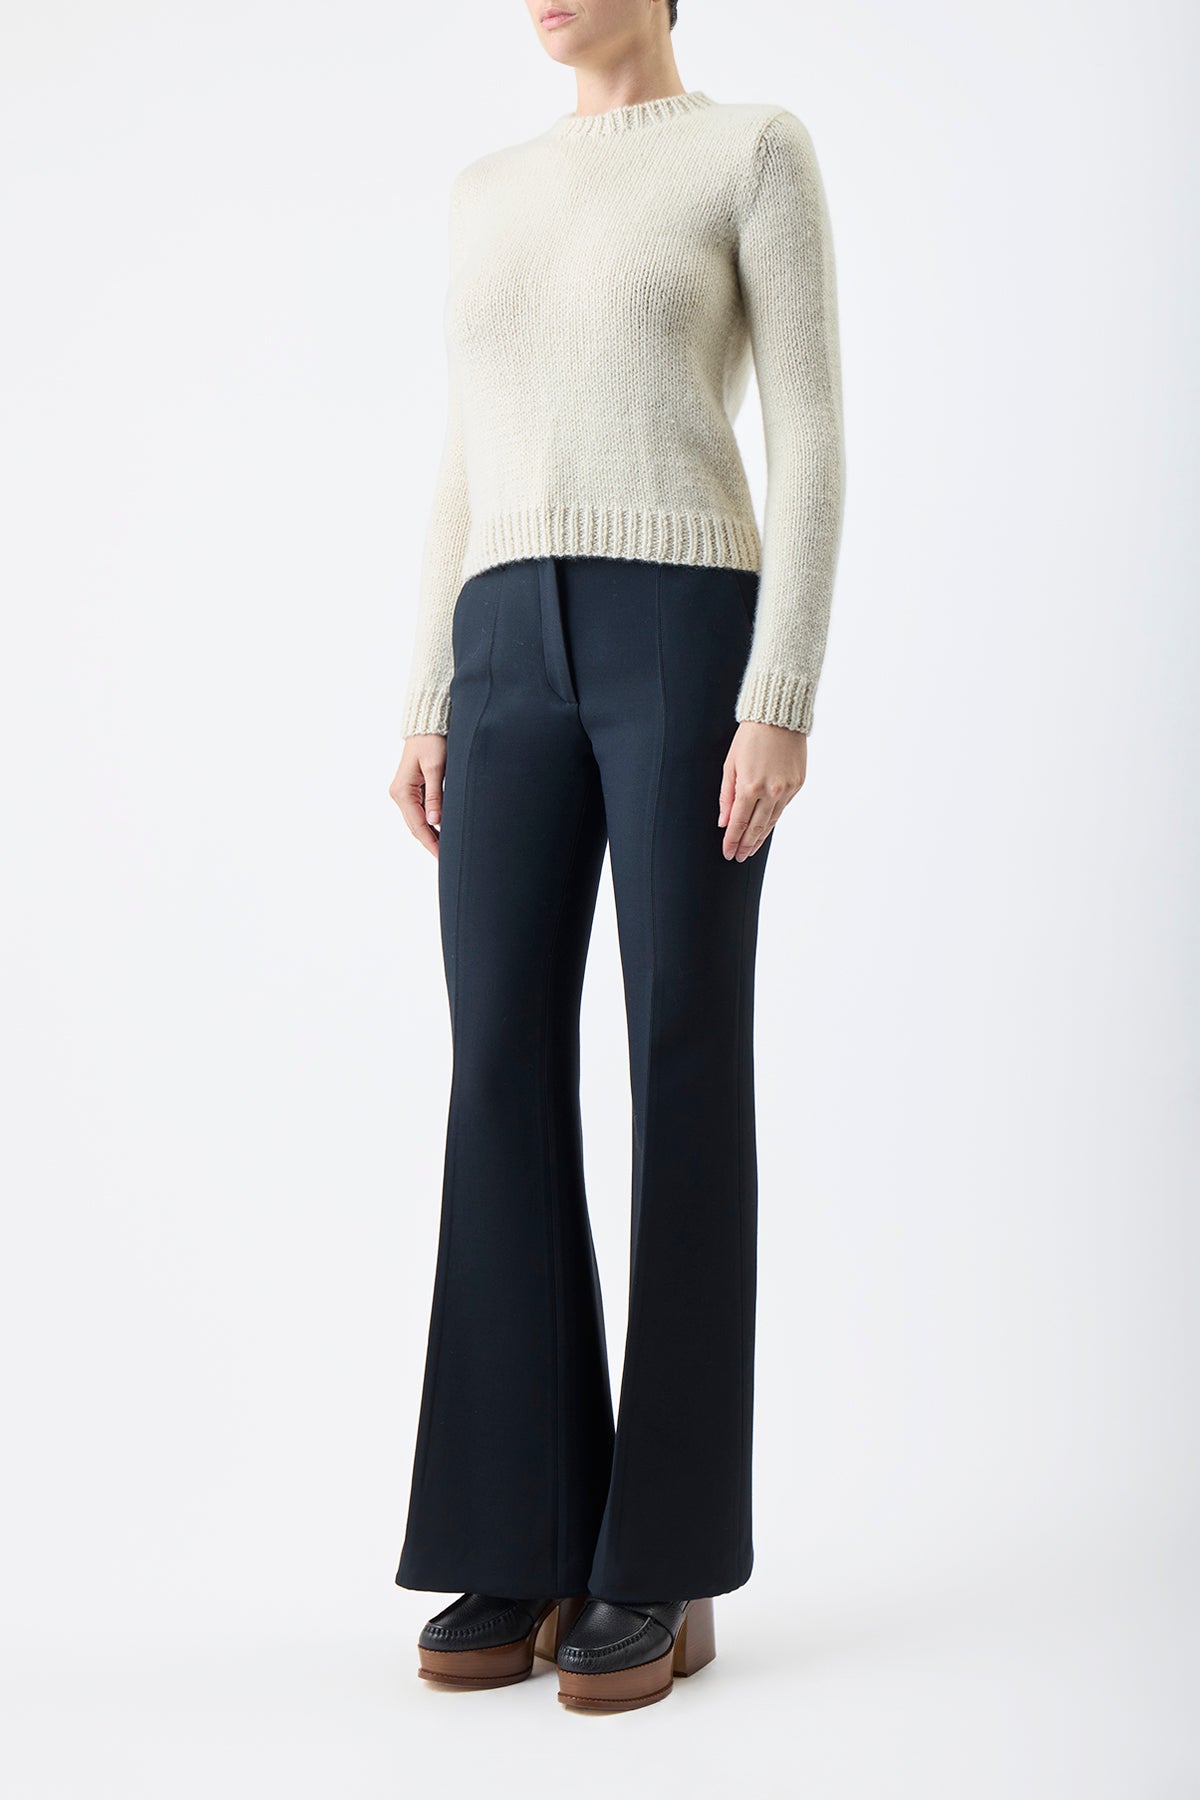 Rhun Knit Sweater in Ivory Dense Cashmere